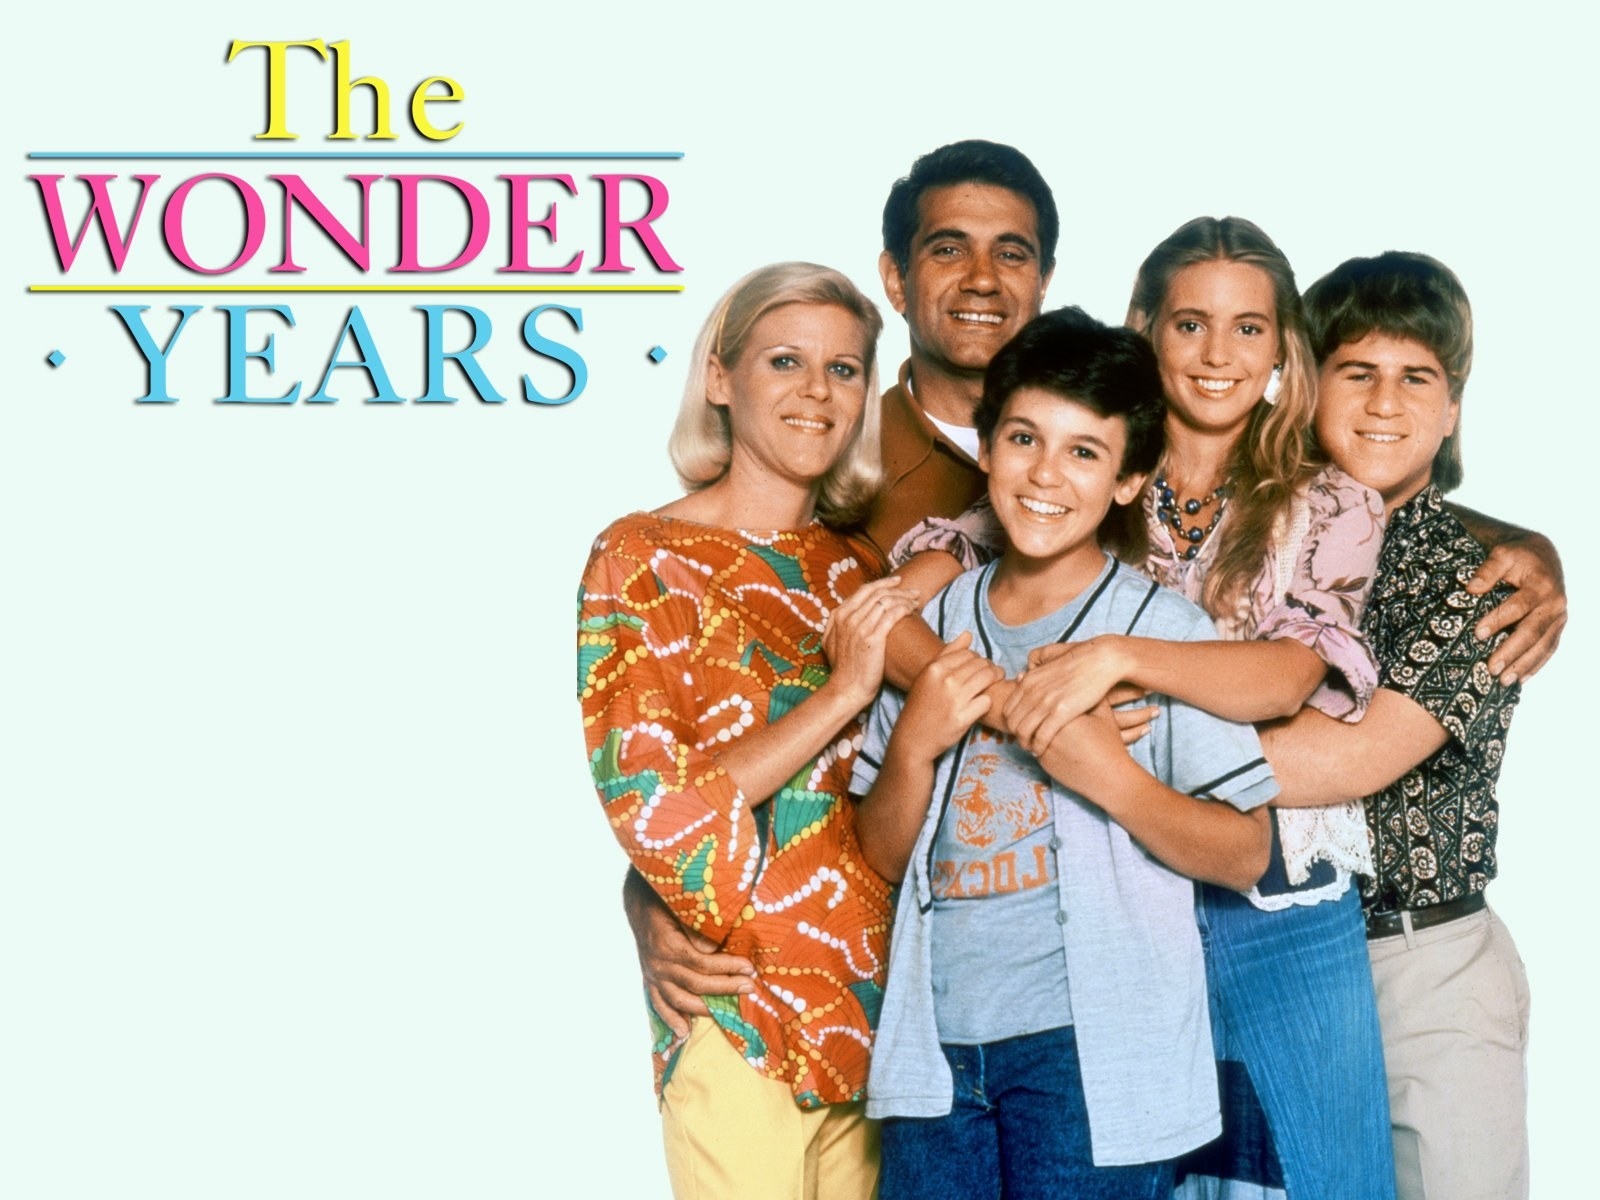 CAST OF THE WONDER YEARS